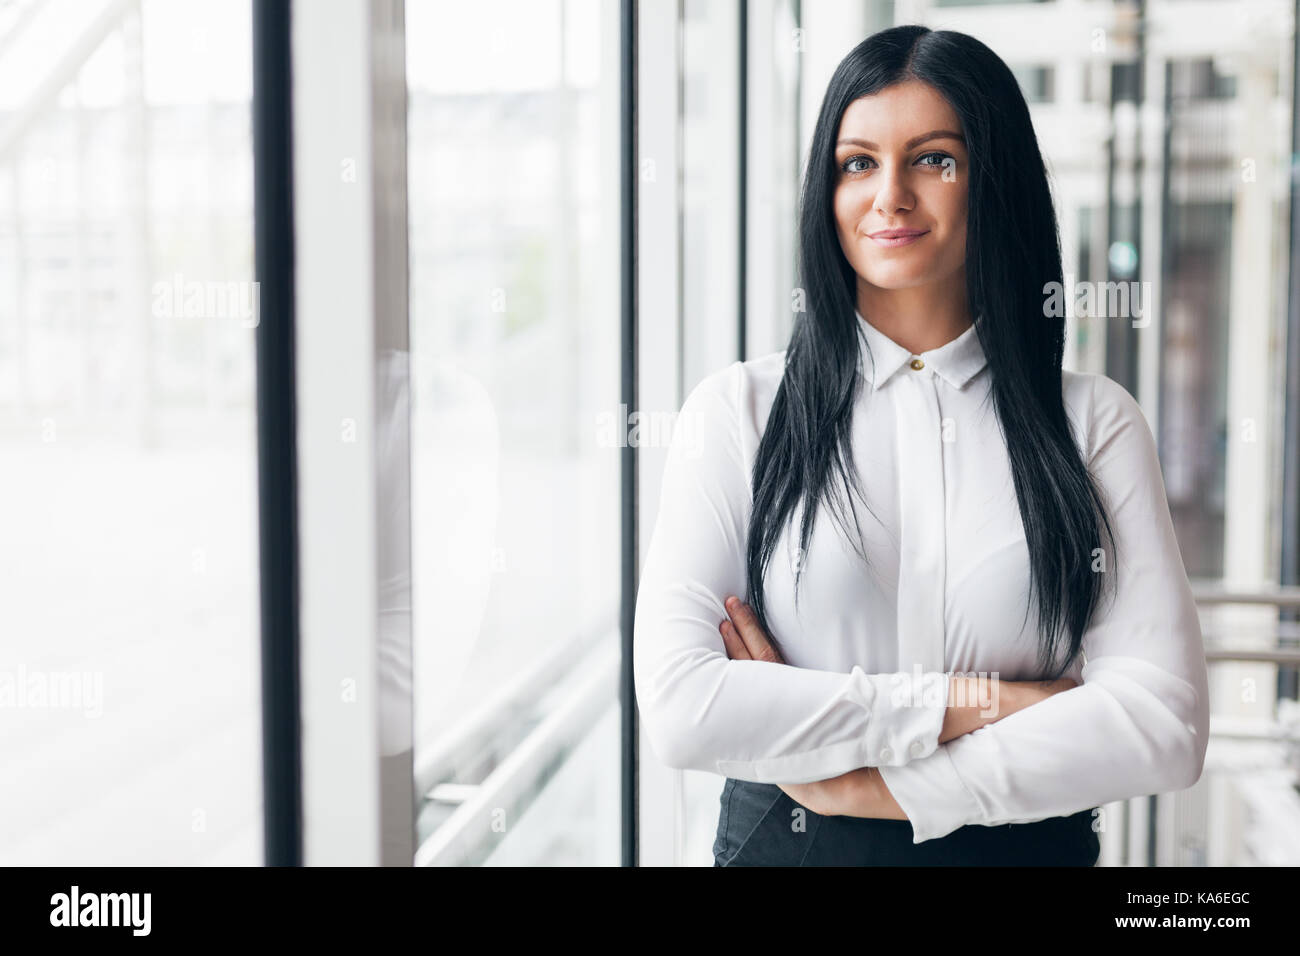 Successful confident young business woman in an office setting Stock Photo